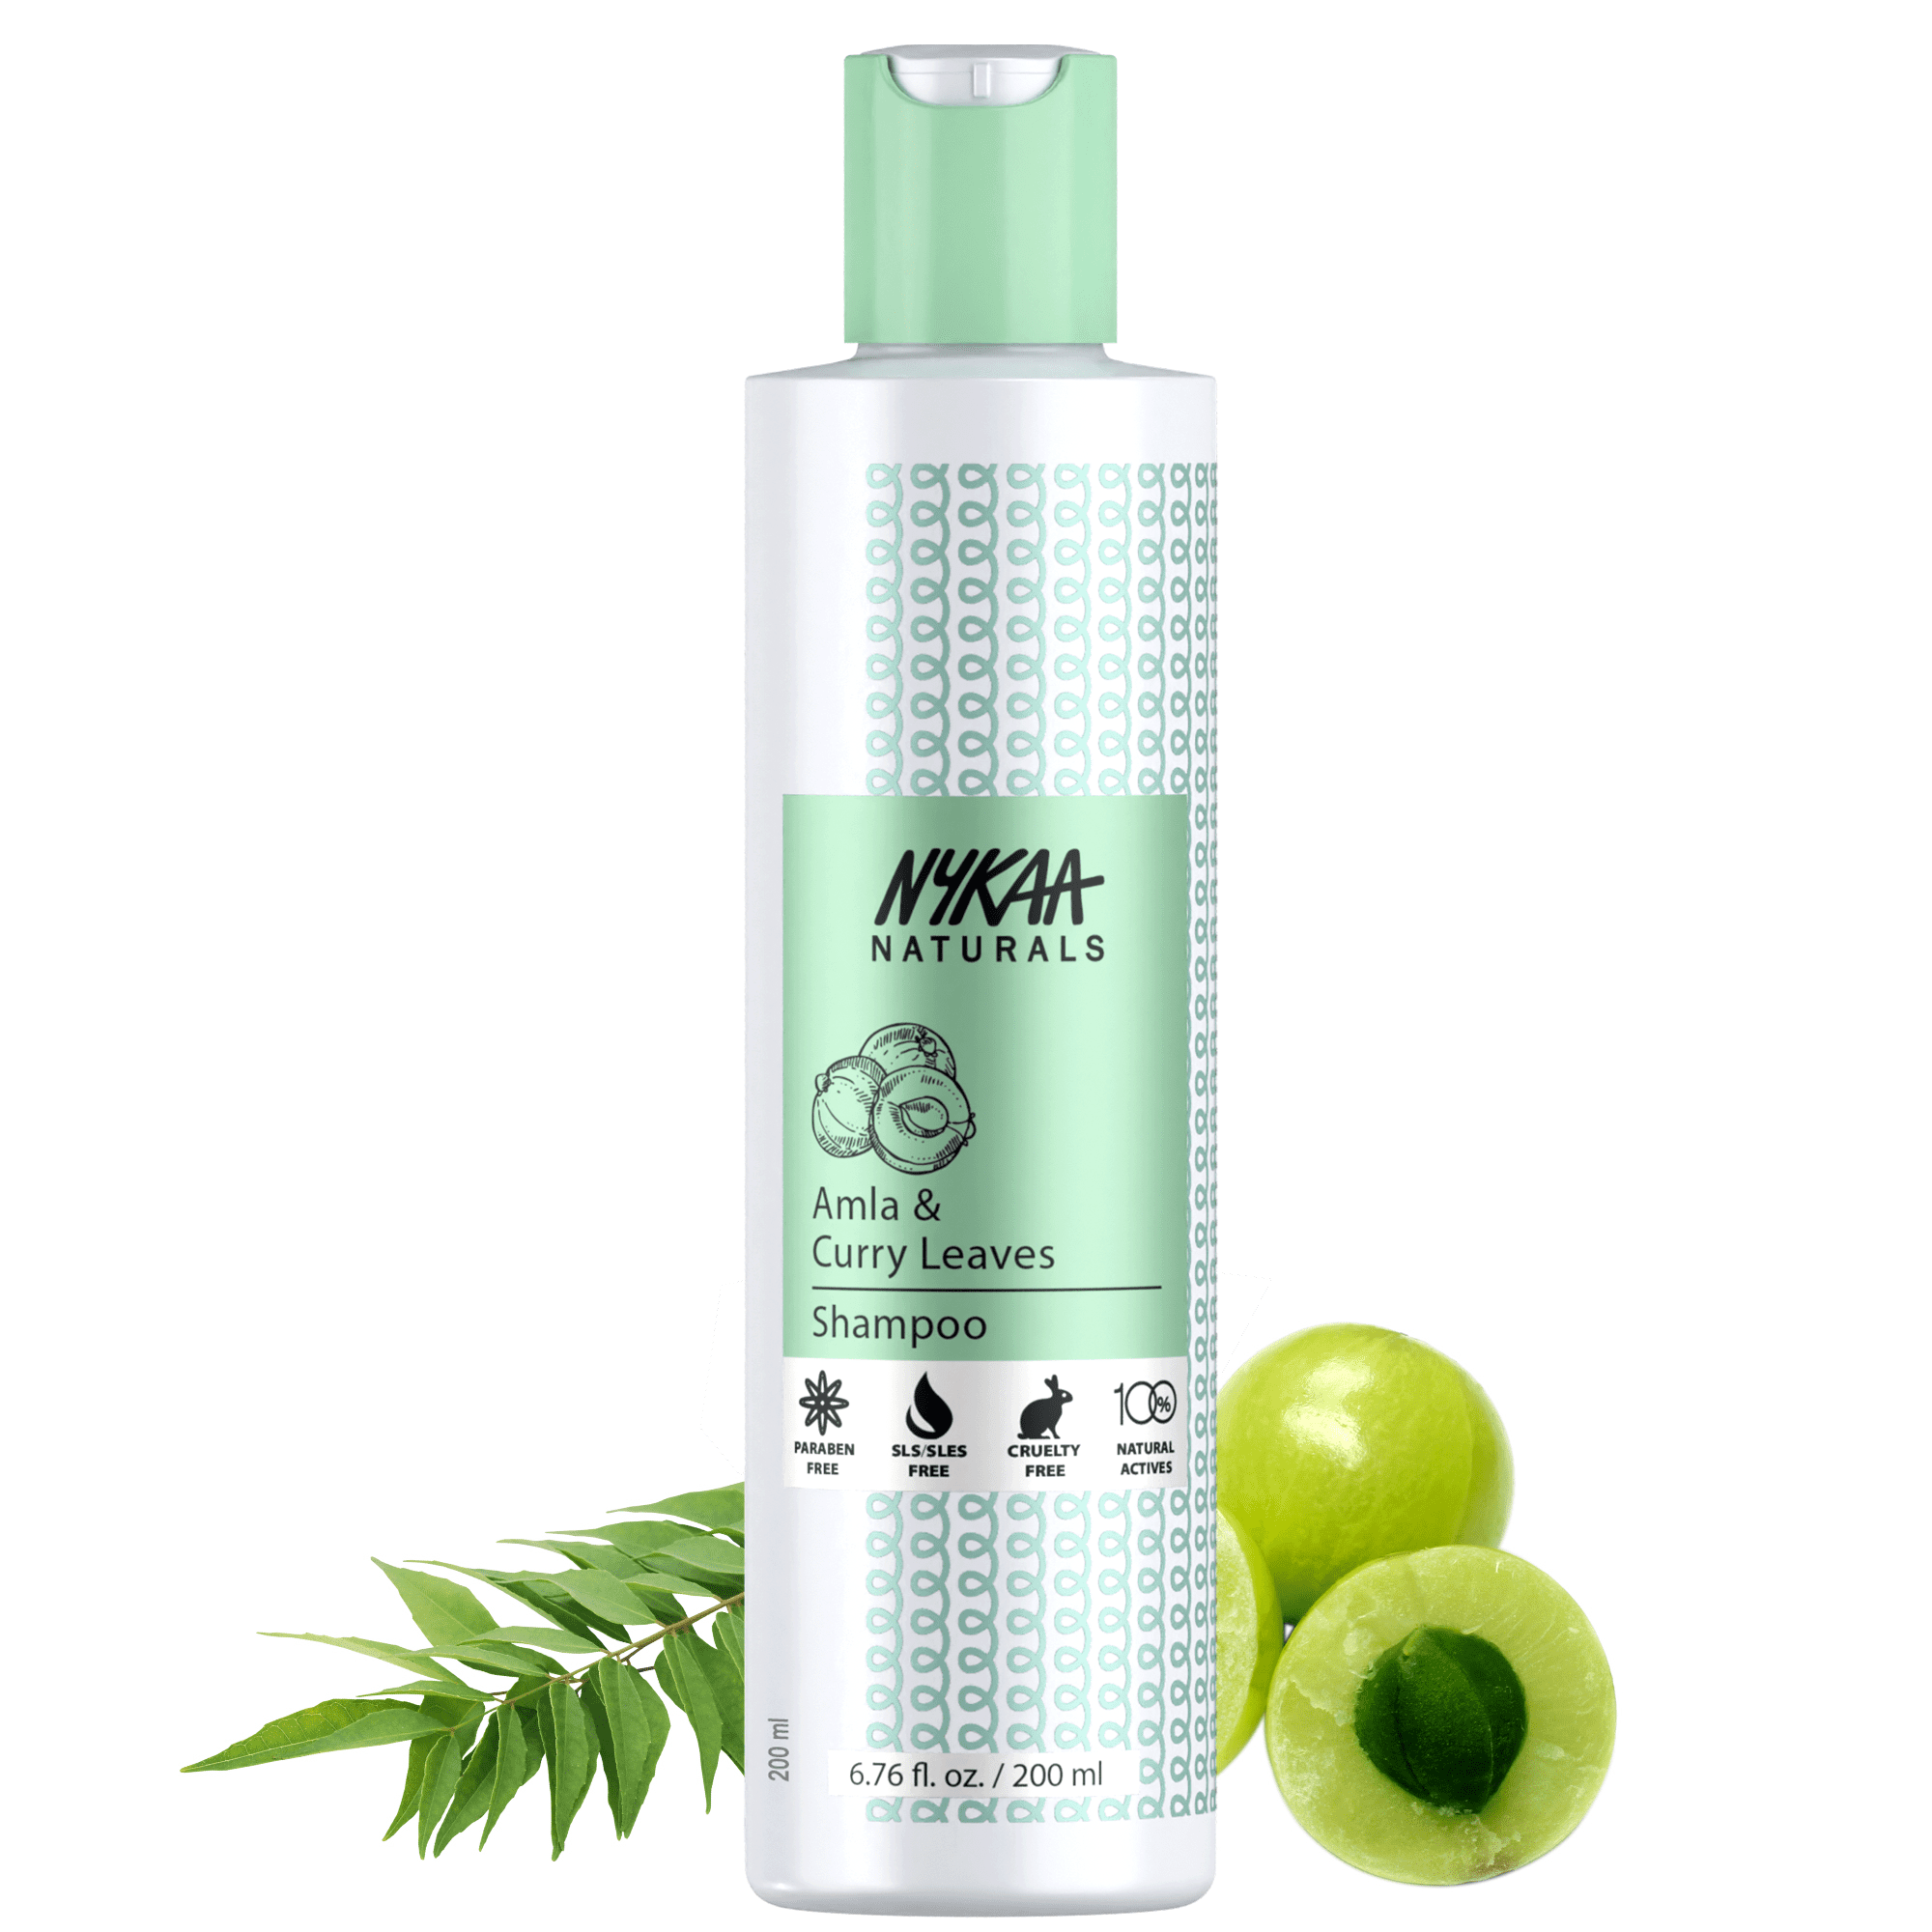 Nykaa Naturals Amla & Curry Leaves Shampoo - Prevents Hair Loss and  Thinning, 100% Natural Actives, Paraben & Sulphate Free, for All Hair Types  - 200ml 